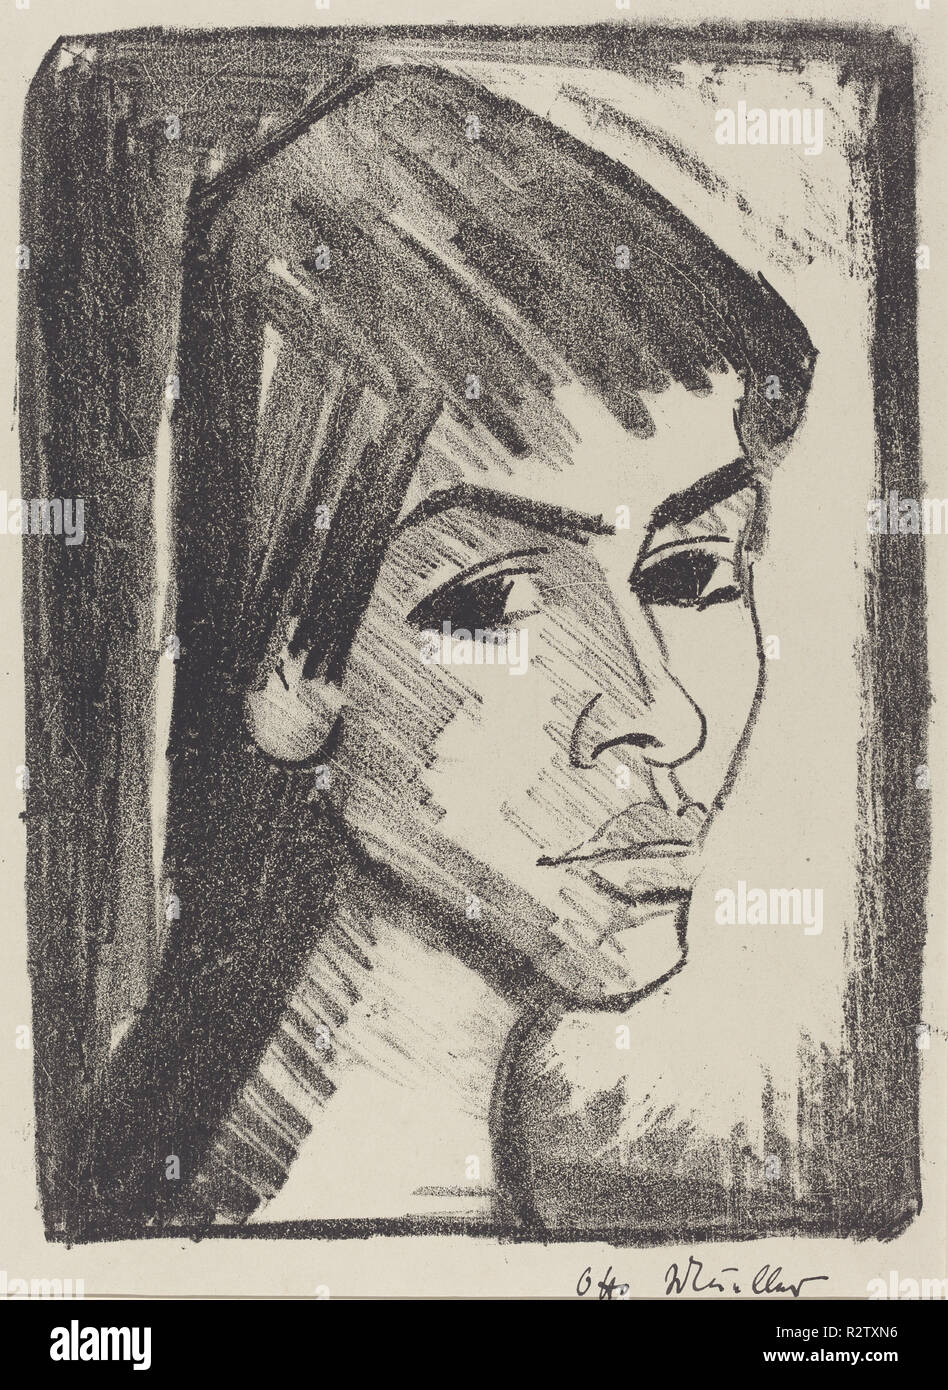 Irene Altman. Dated: 1921/1922. Medium: lithograph. Museum: National Gallery of Art, Washington DC. Author: Otto Müller. Stock Photo